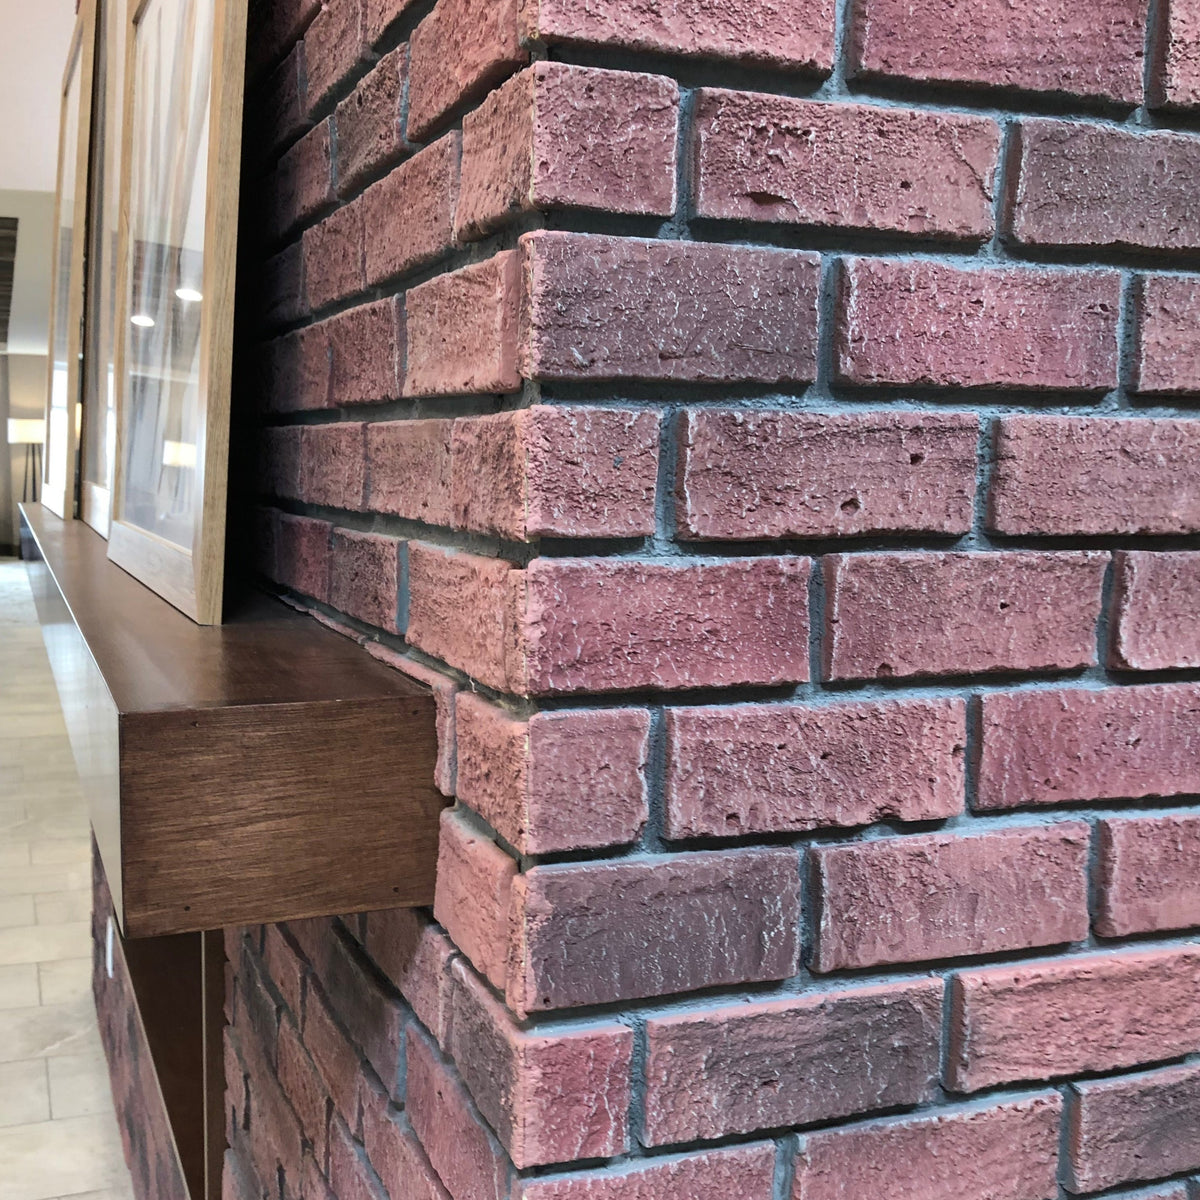 ClassicBrick 1" Faux Brick Panels - Old Italy